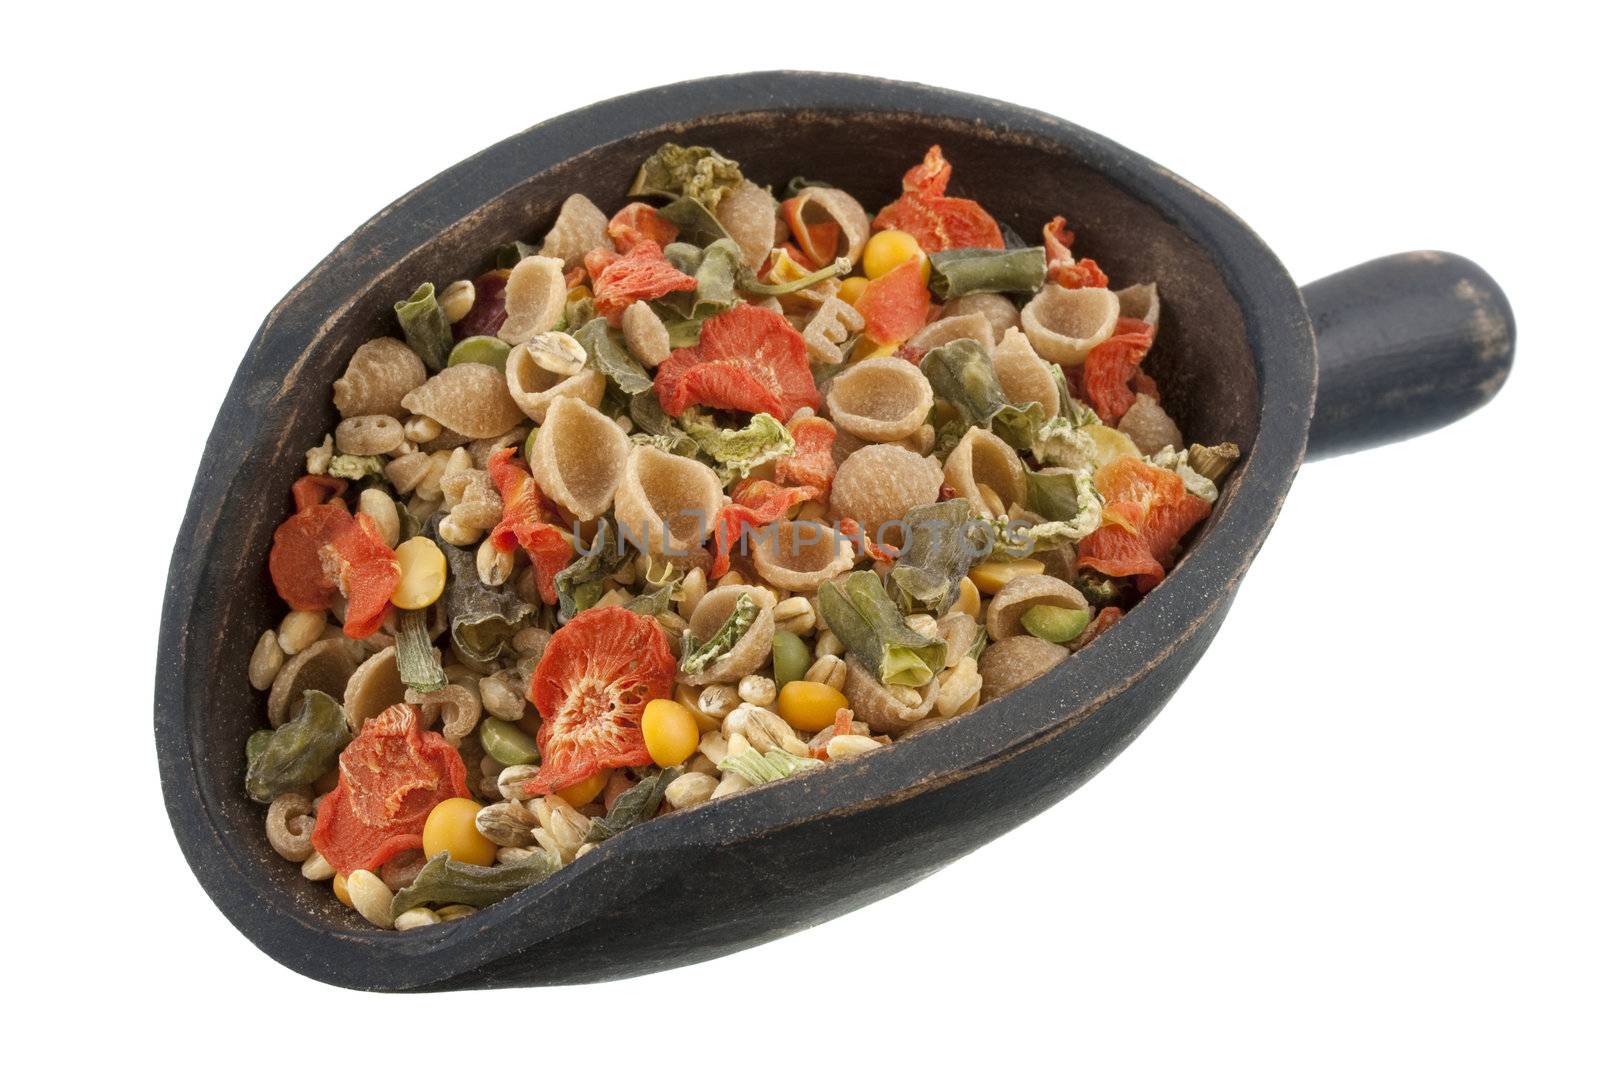 a rustic, wooden scoop of vegetable soup mix including whole wheat pasta, carrots, peas, leeks, green beans, bell peppers, corn, celery and onions, isolated on white